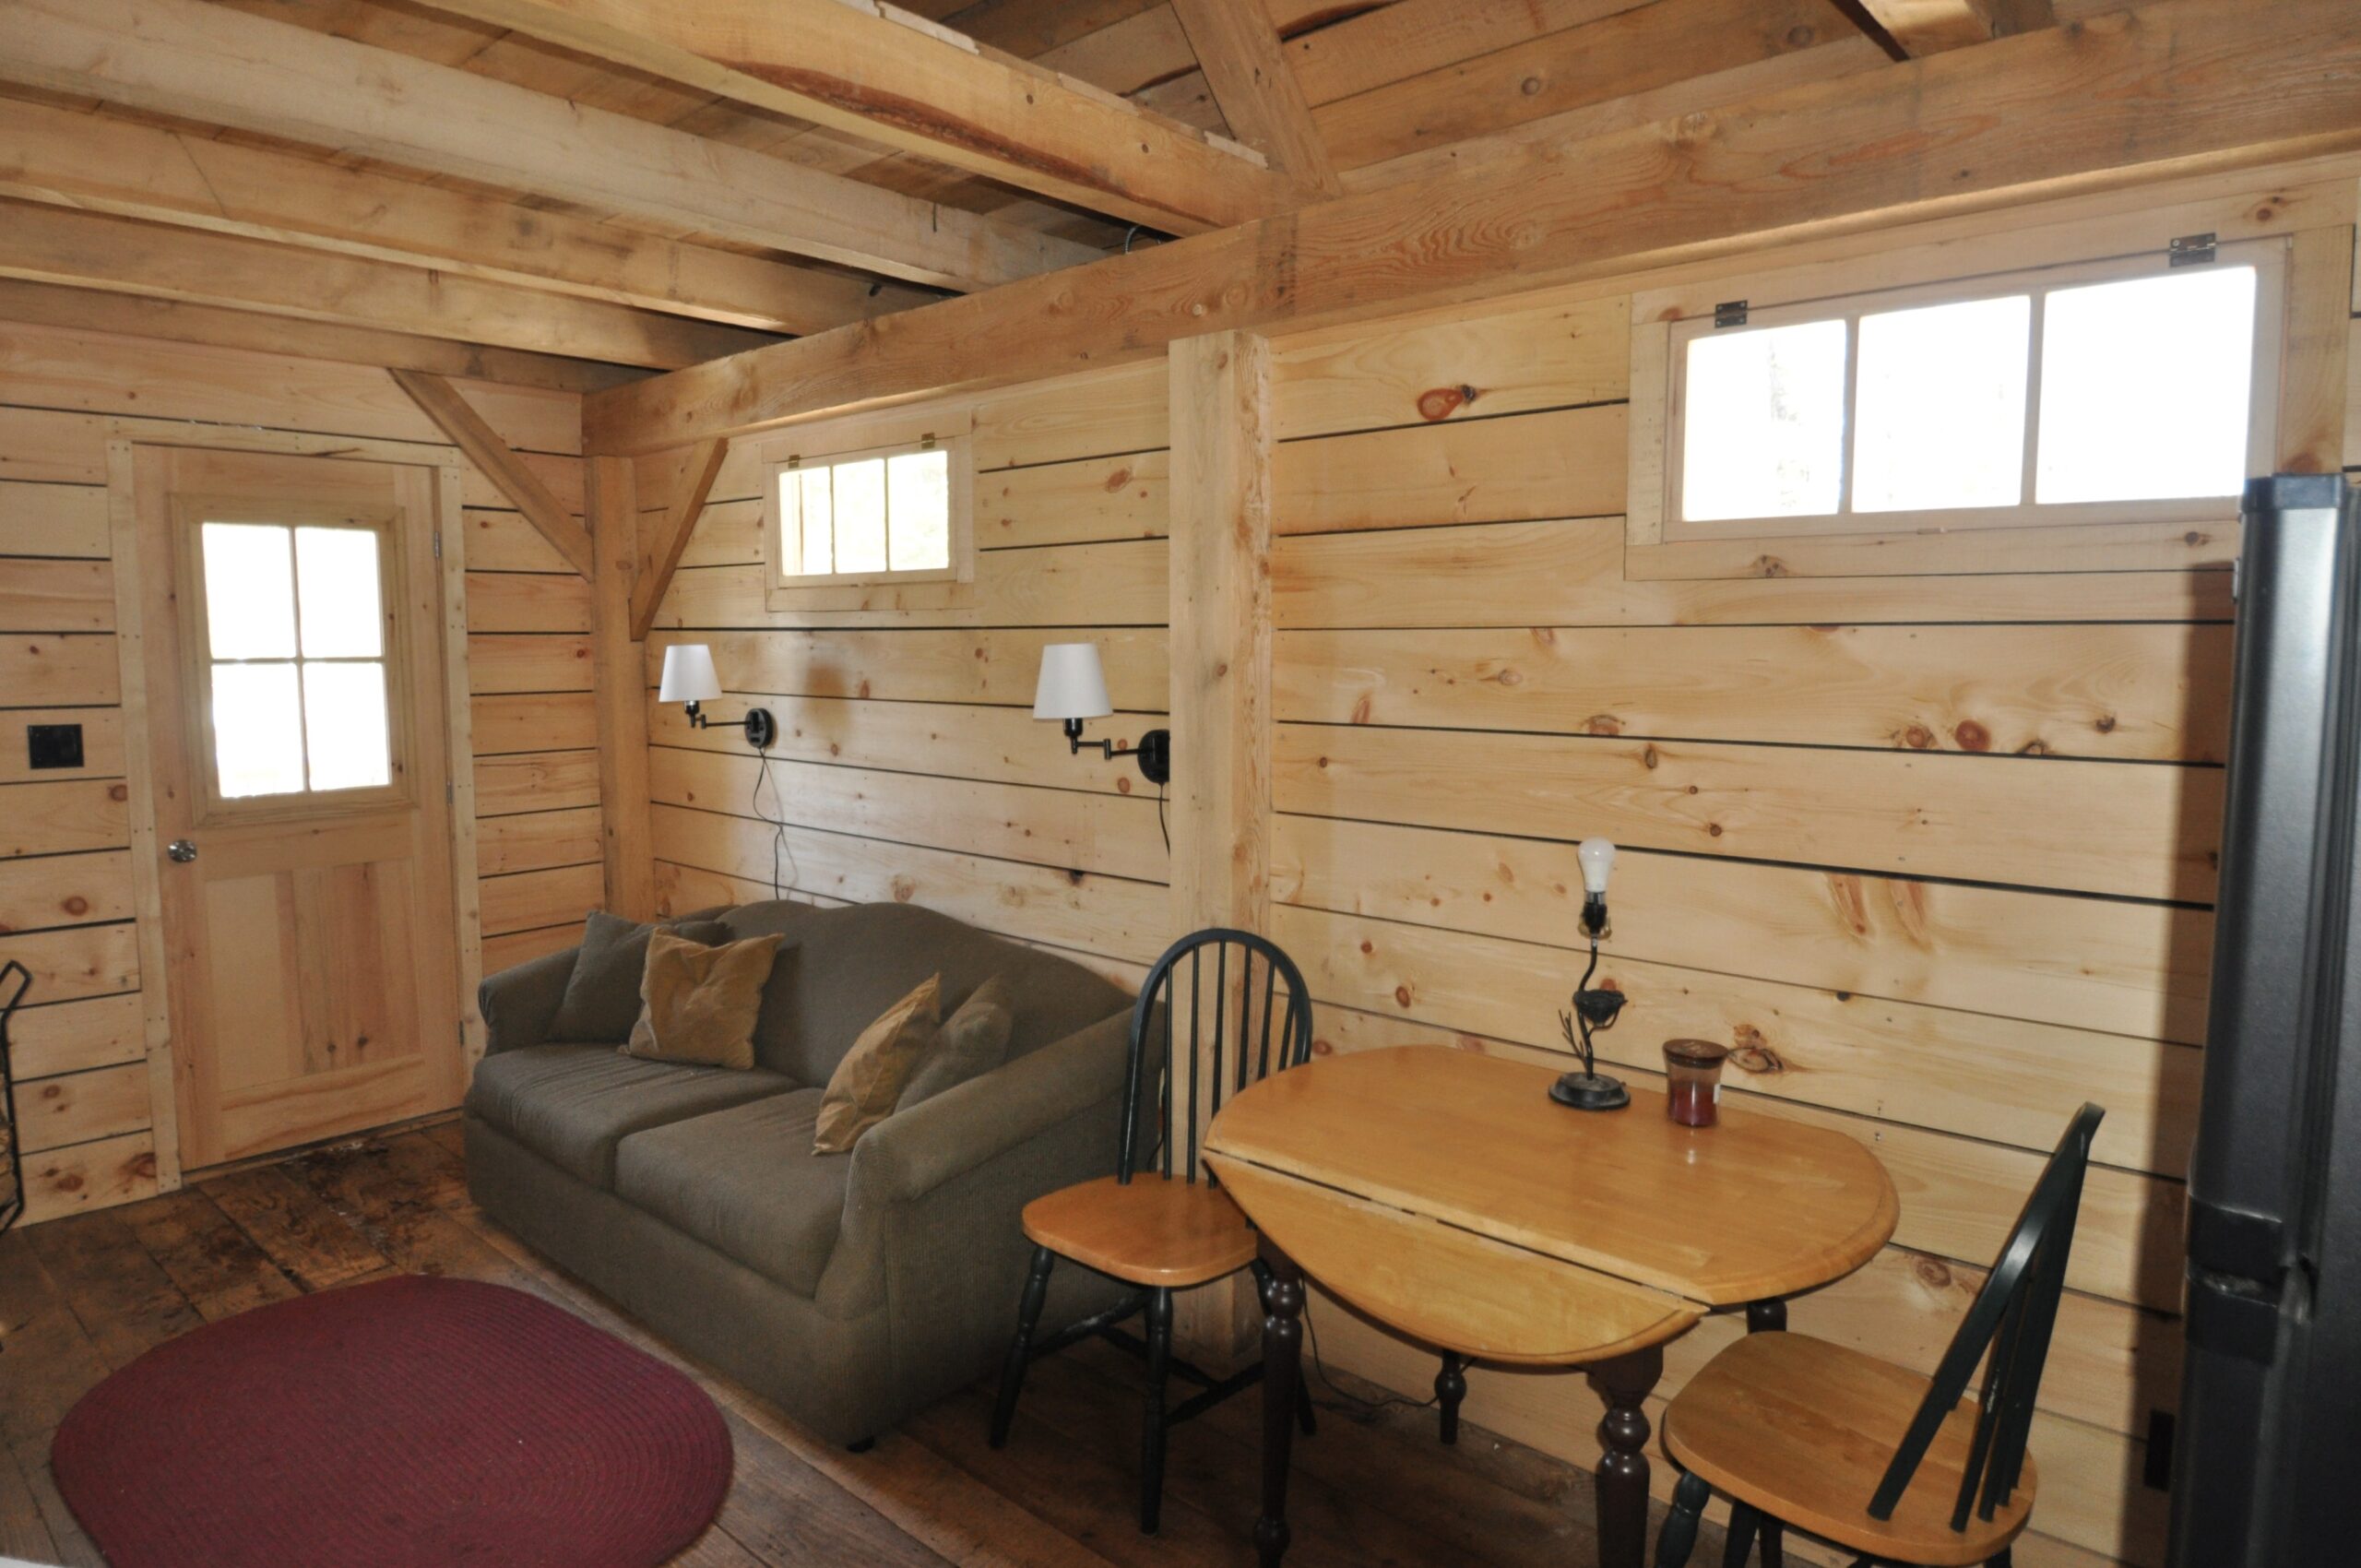 Interior living area of a wood cabin, with a couch and a small dining table. Small windows let in natural light.